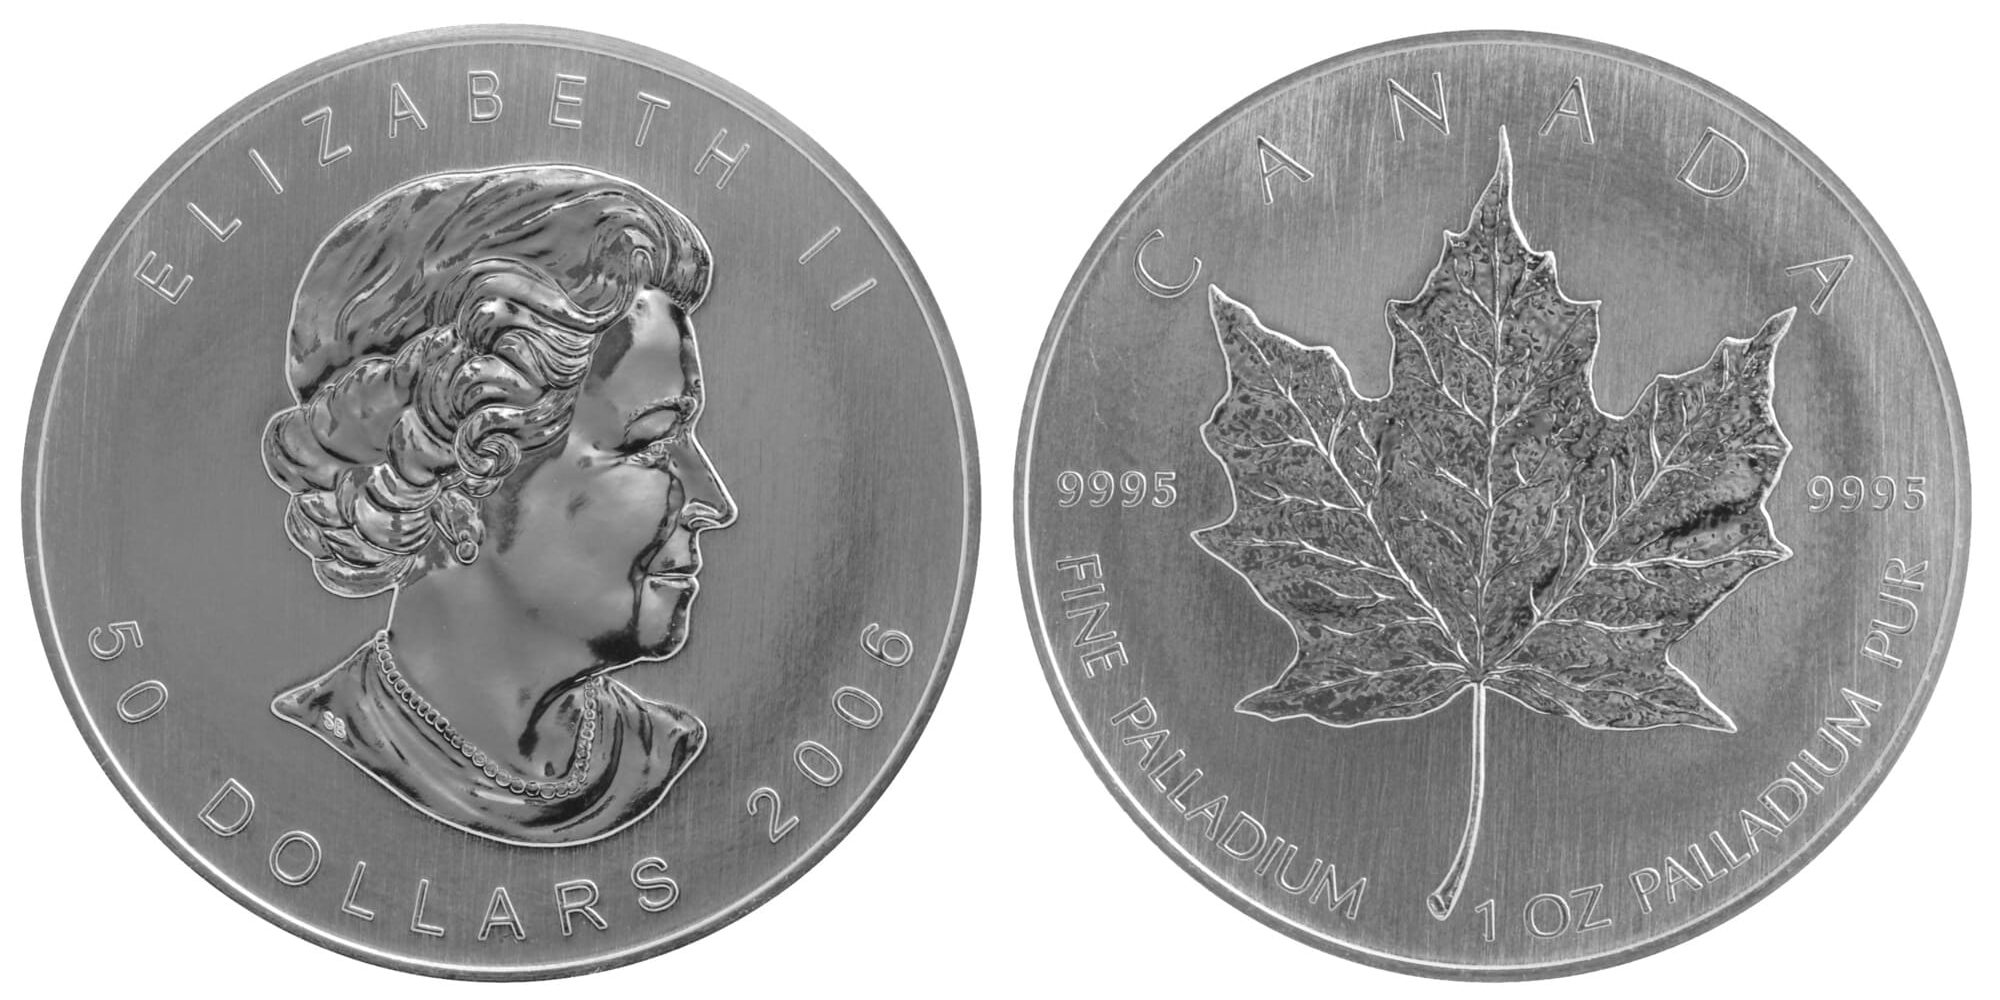 Canadian silver Maple Leaf silver coin